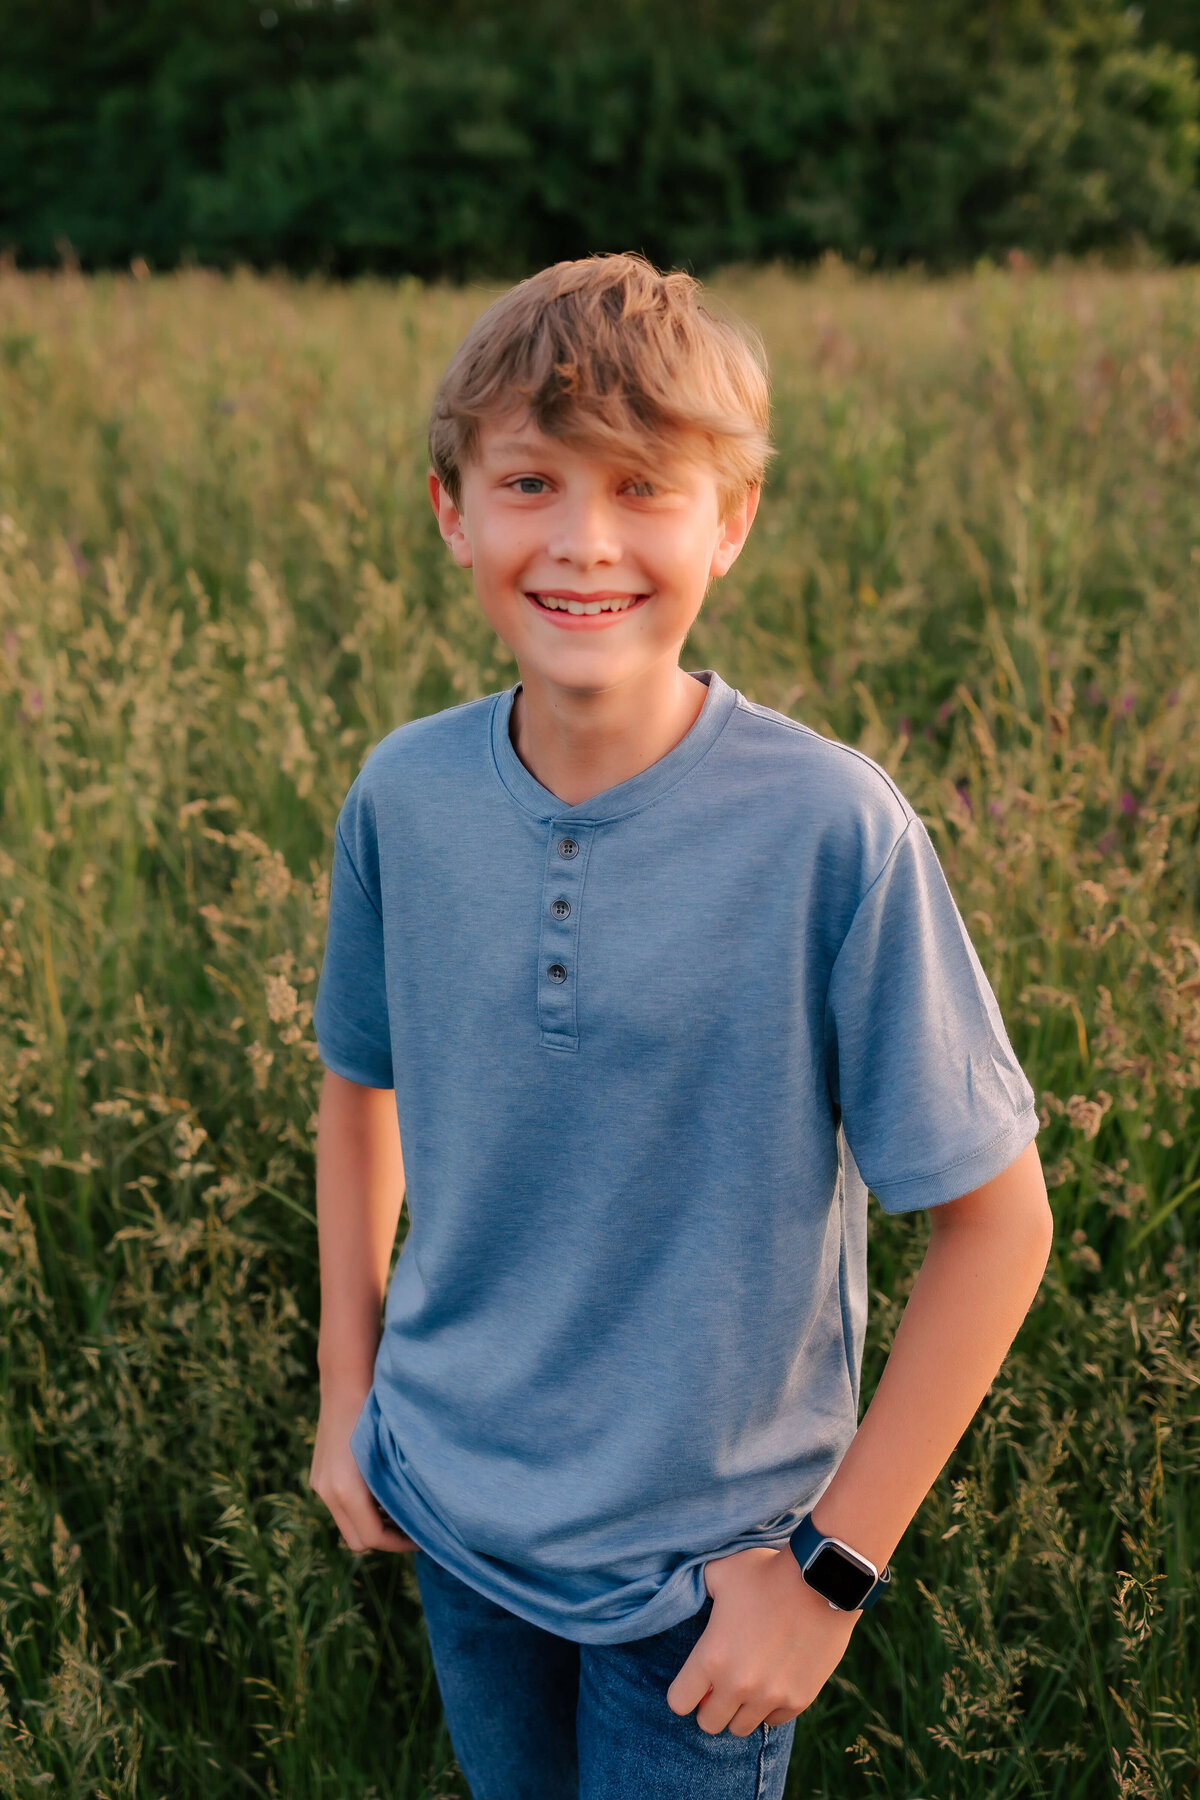 A handsome young man stands in the field surrounded by tall grass at sunset.